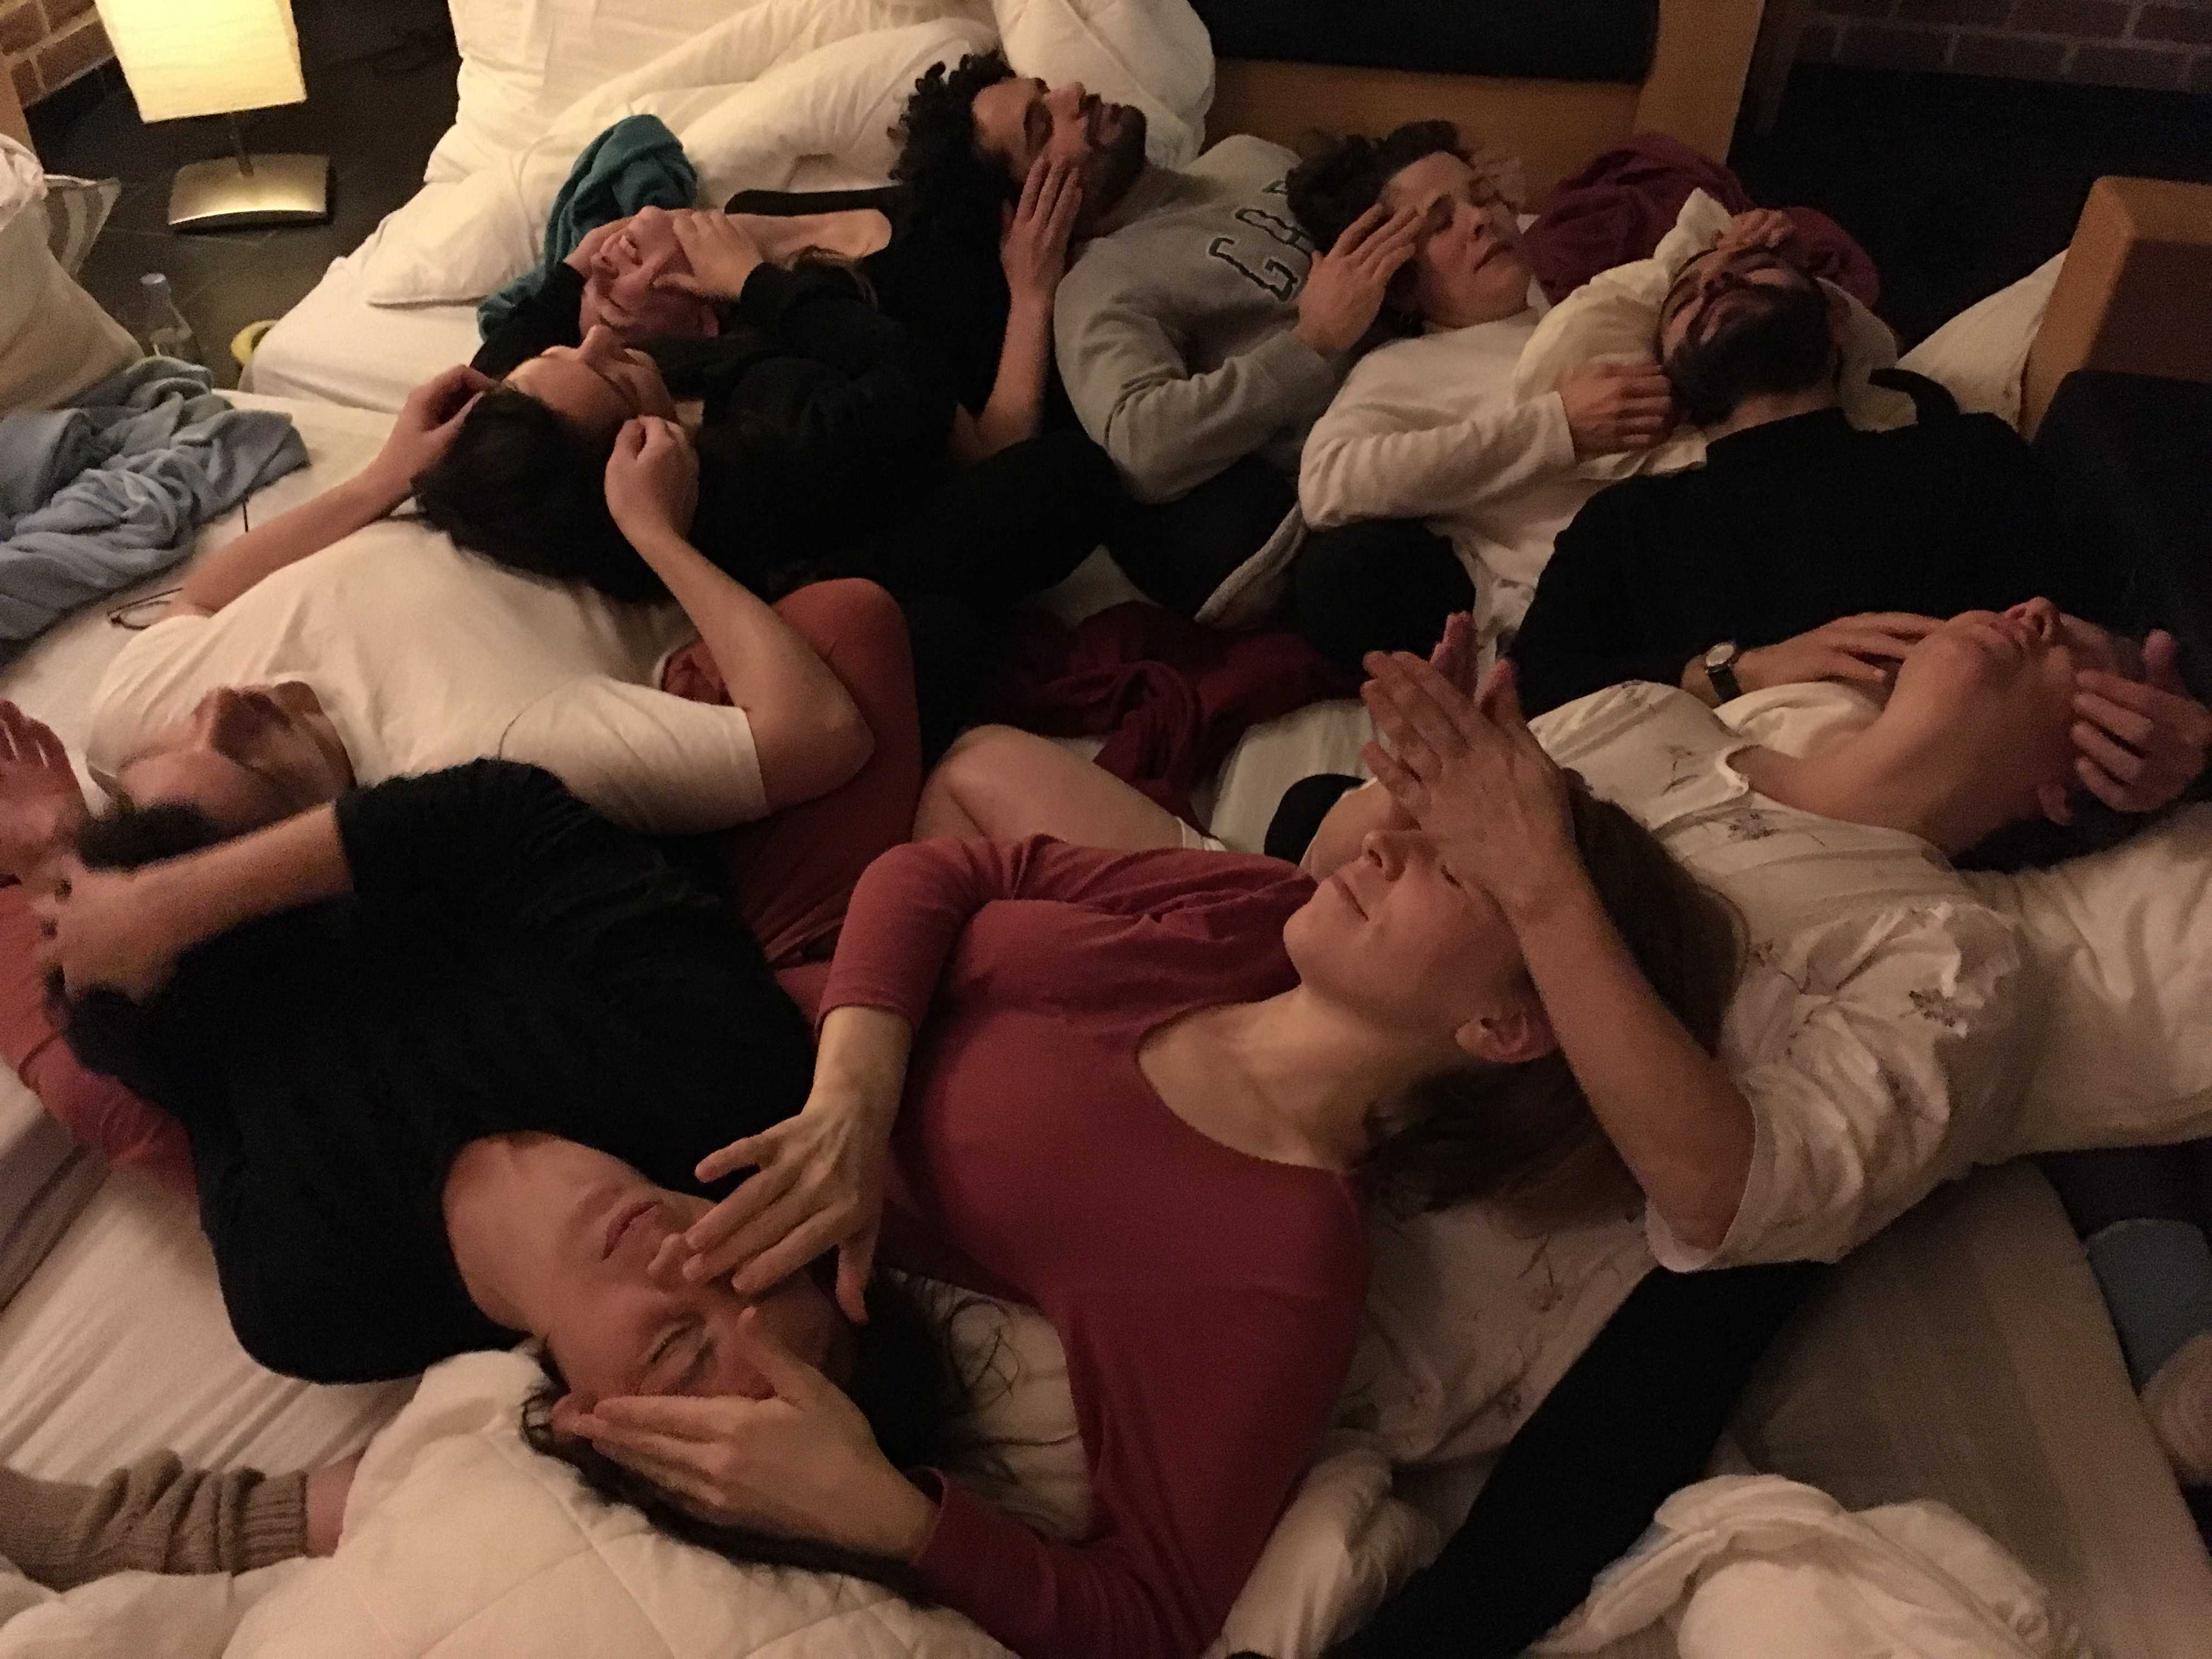 Facial massage and late night session of 'Sleeping with a Vengeance, Dreaming of a Life' a study group led by Maria Berríos, Tina Gverović and Ruth Noack,  @ Het Bovenste Bos in Epen, the Netherlands (photo credit: Leeron Tur-Kaspa, February 2018)